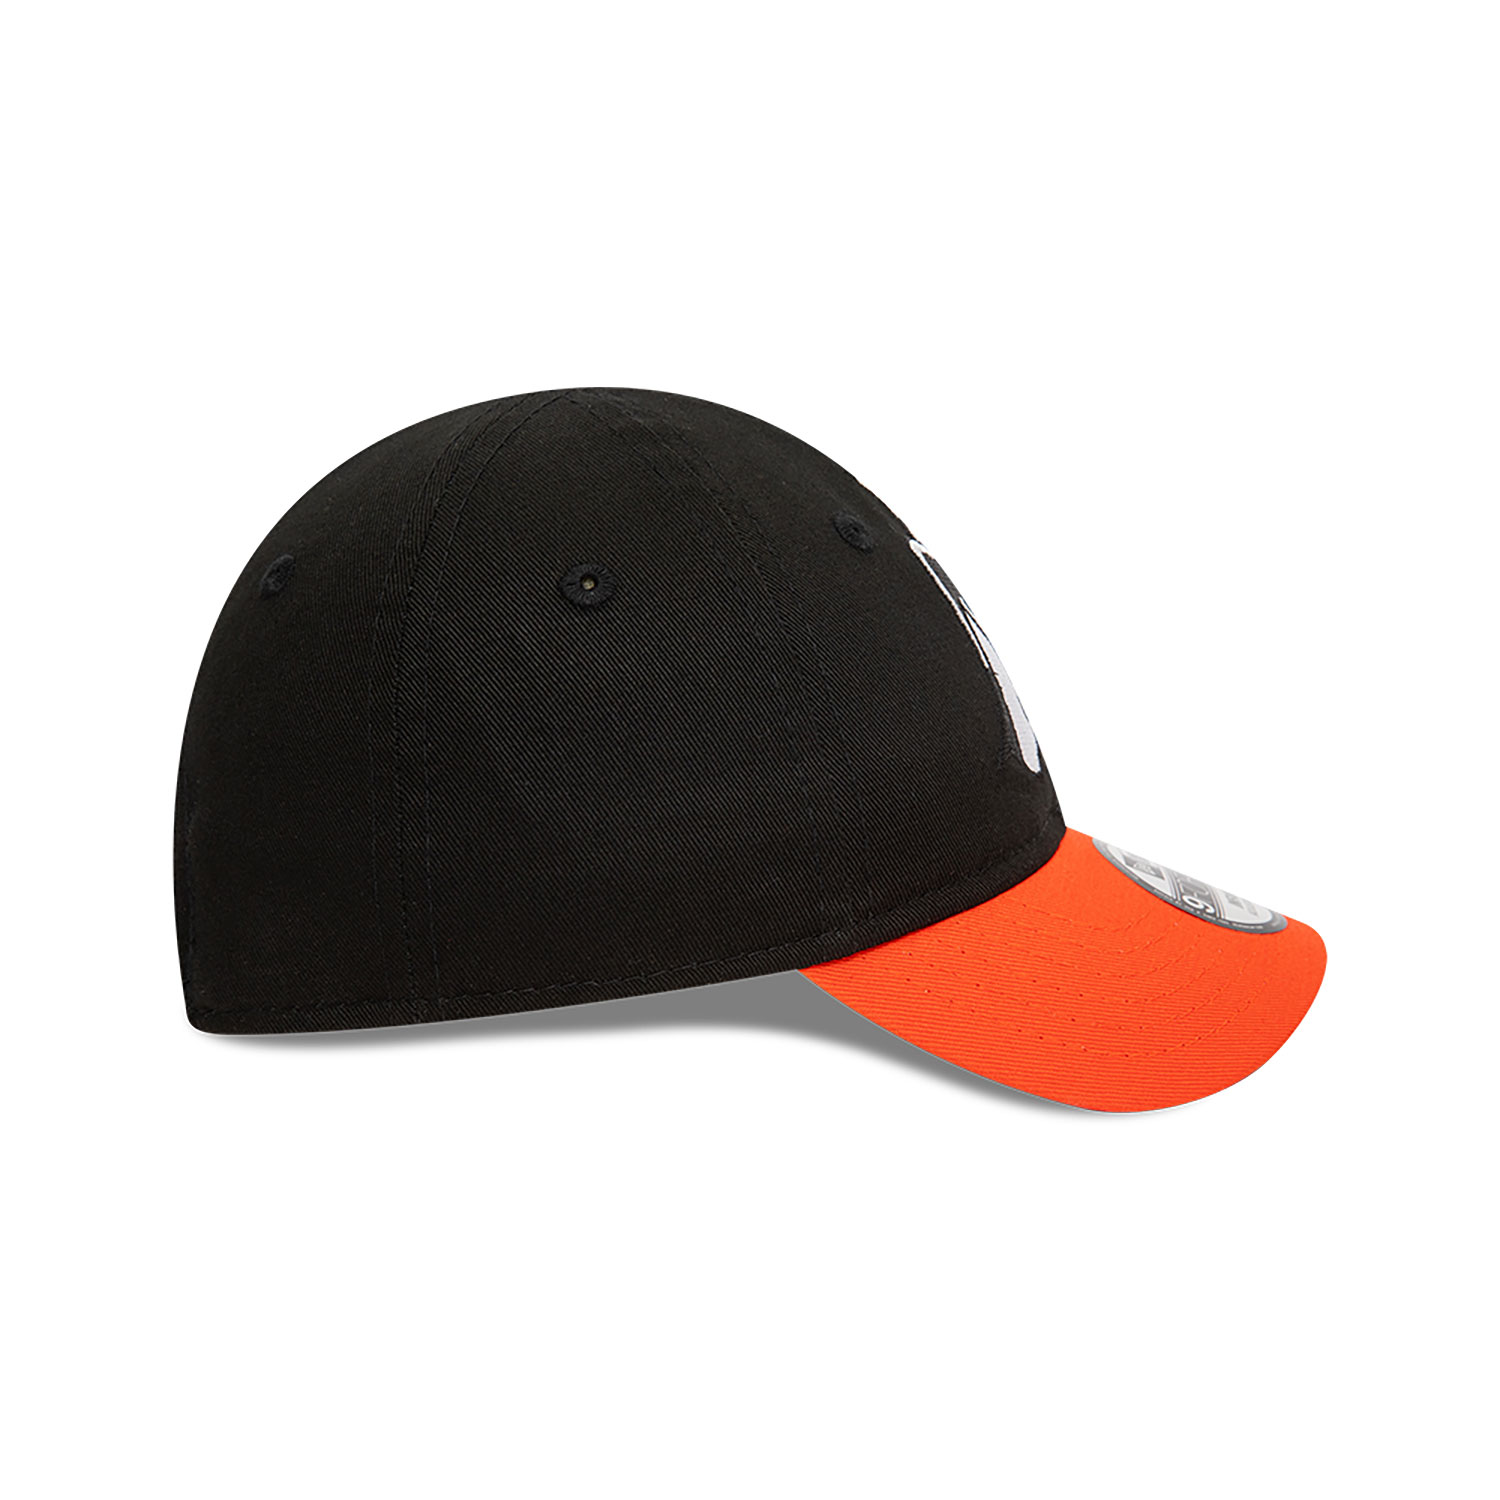 Daffy Duck Looney Tunes Infant Black 9FORTY Adjustable Cap